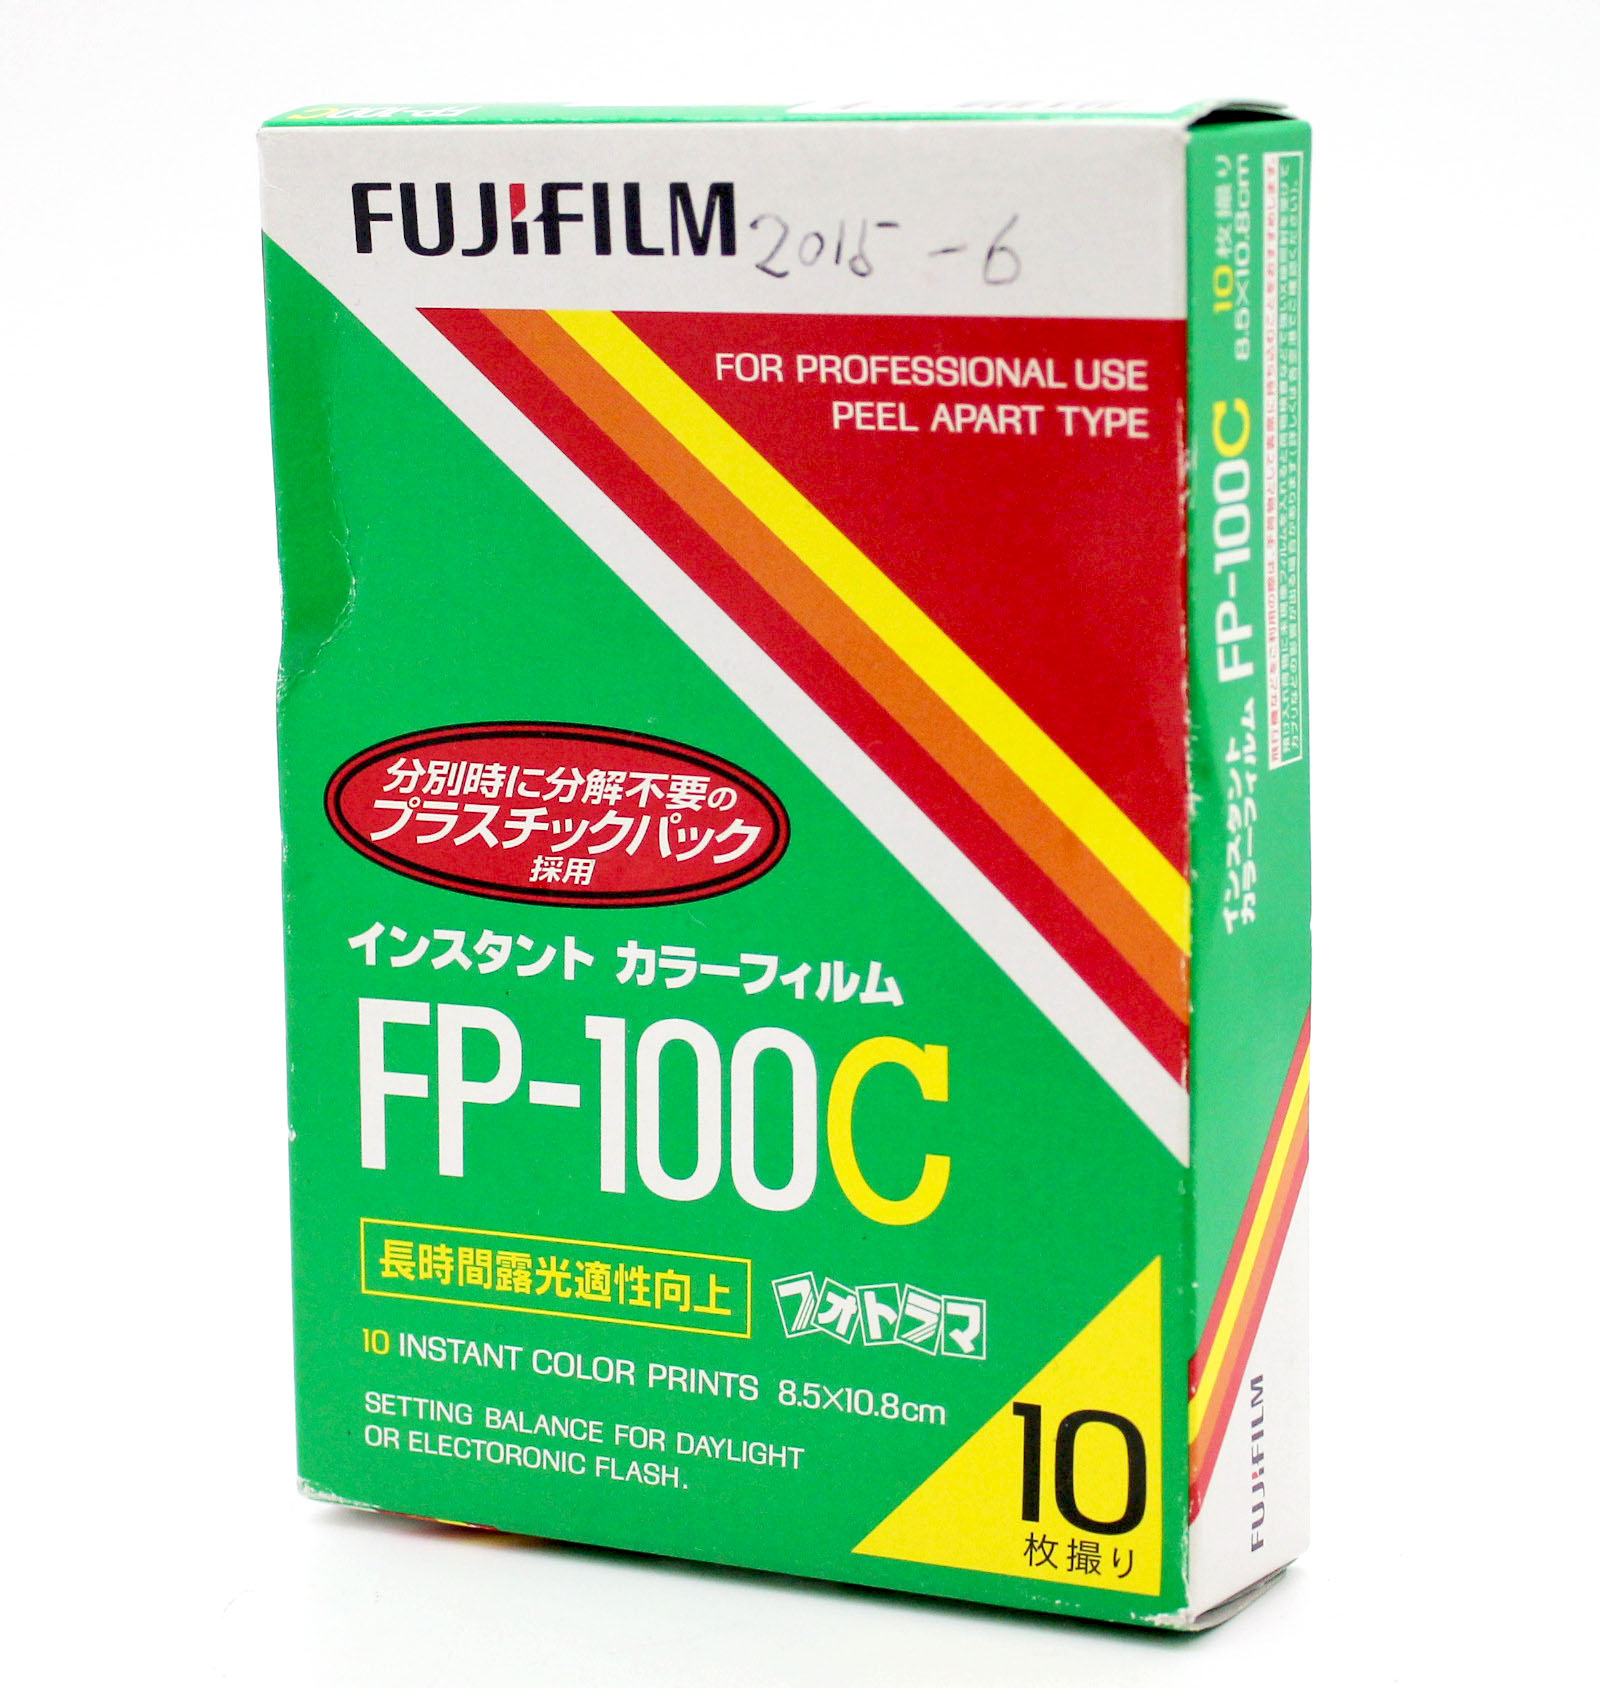  Fujifilm FP-100C Professional Instant Color Film (Expired 6/2015) from Japan Photo 0